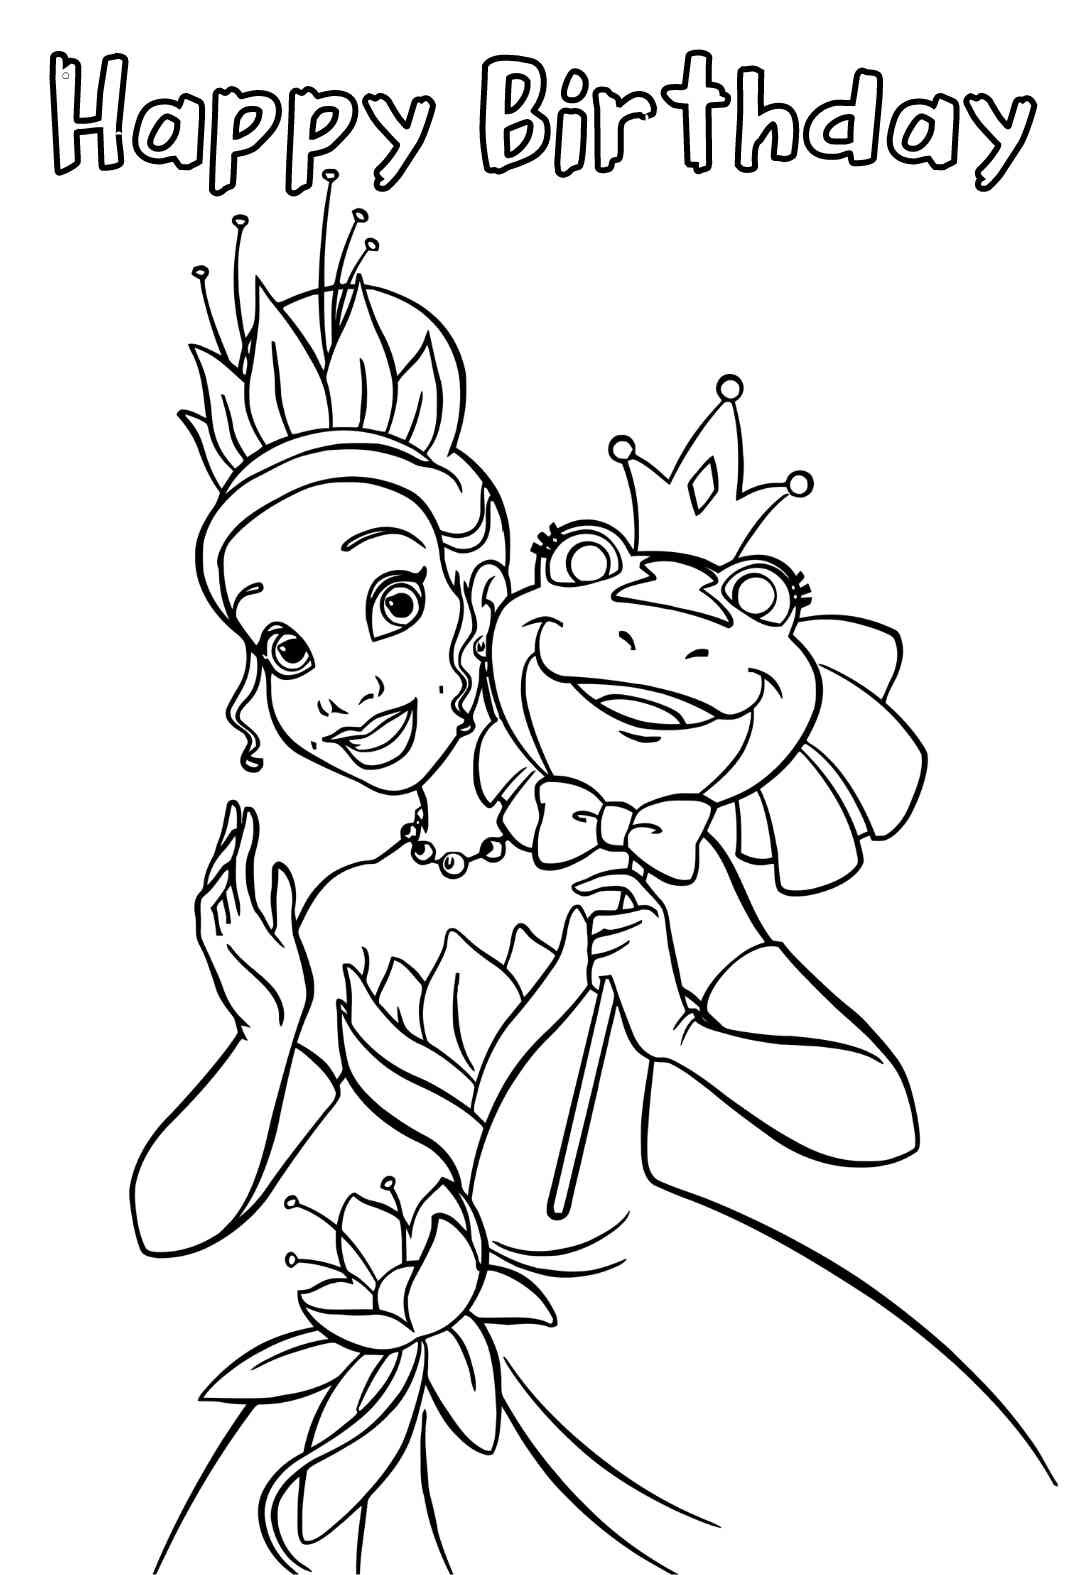 20 Beautiful Princess Birthday Coloring Pages & Cards free ...